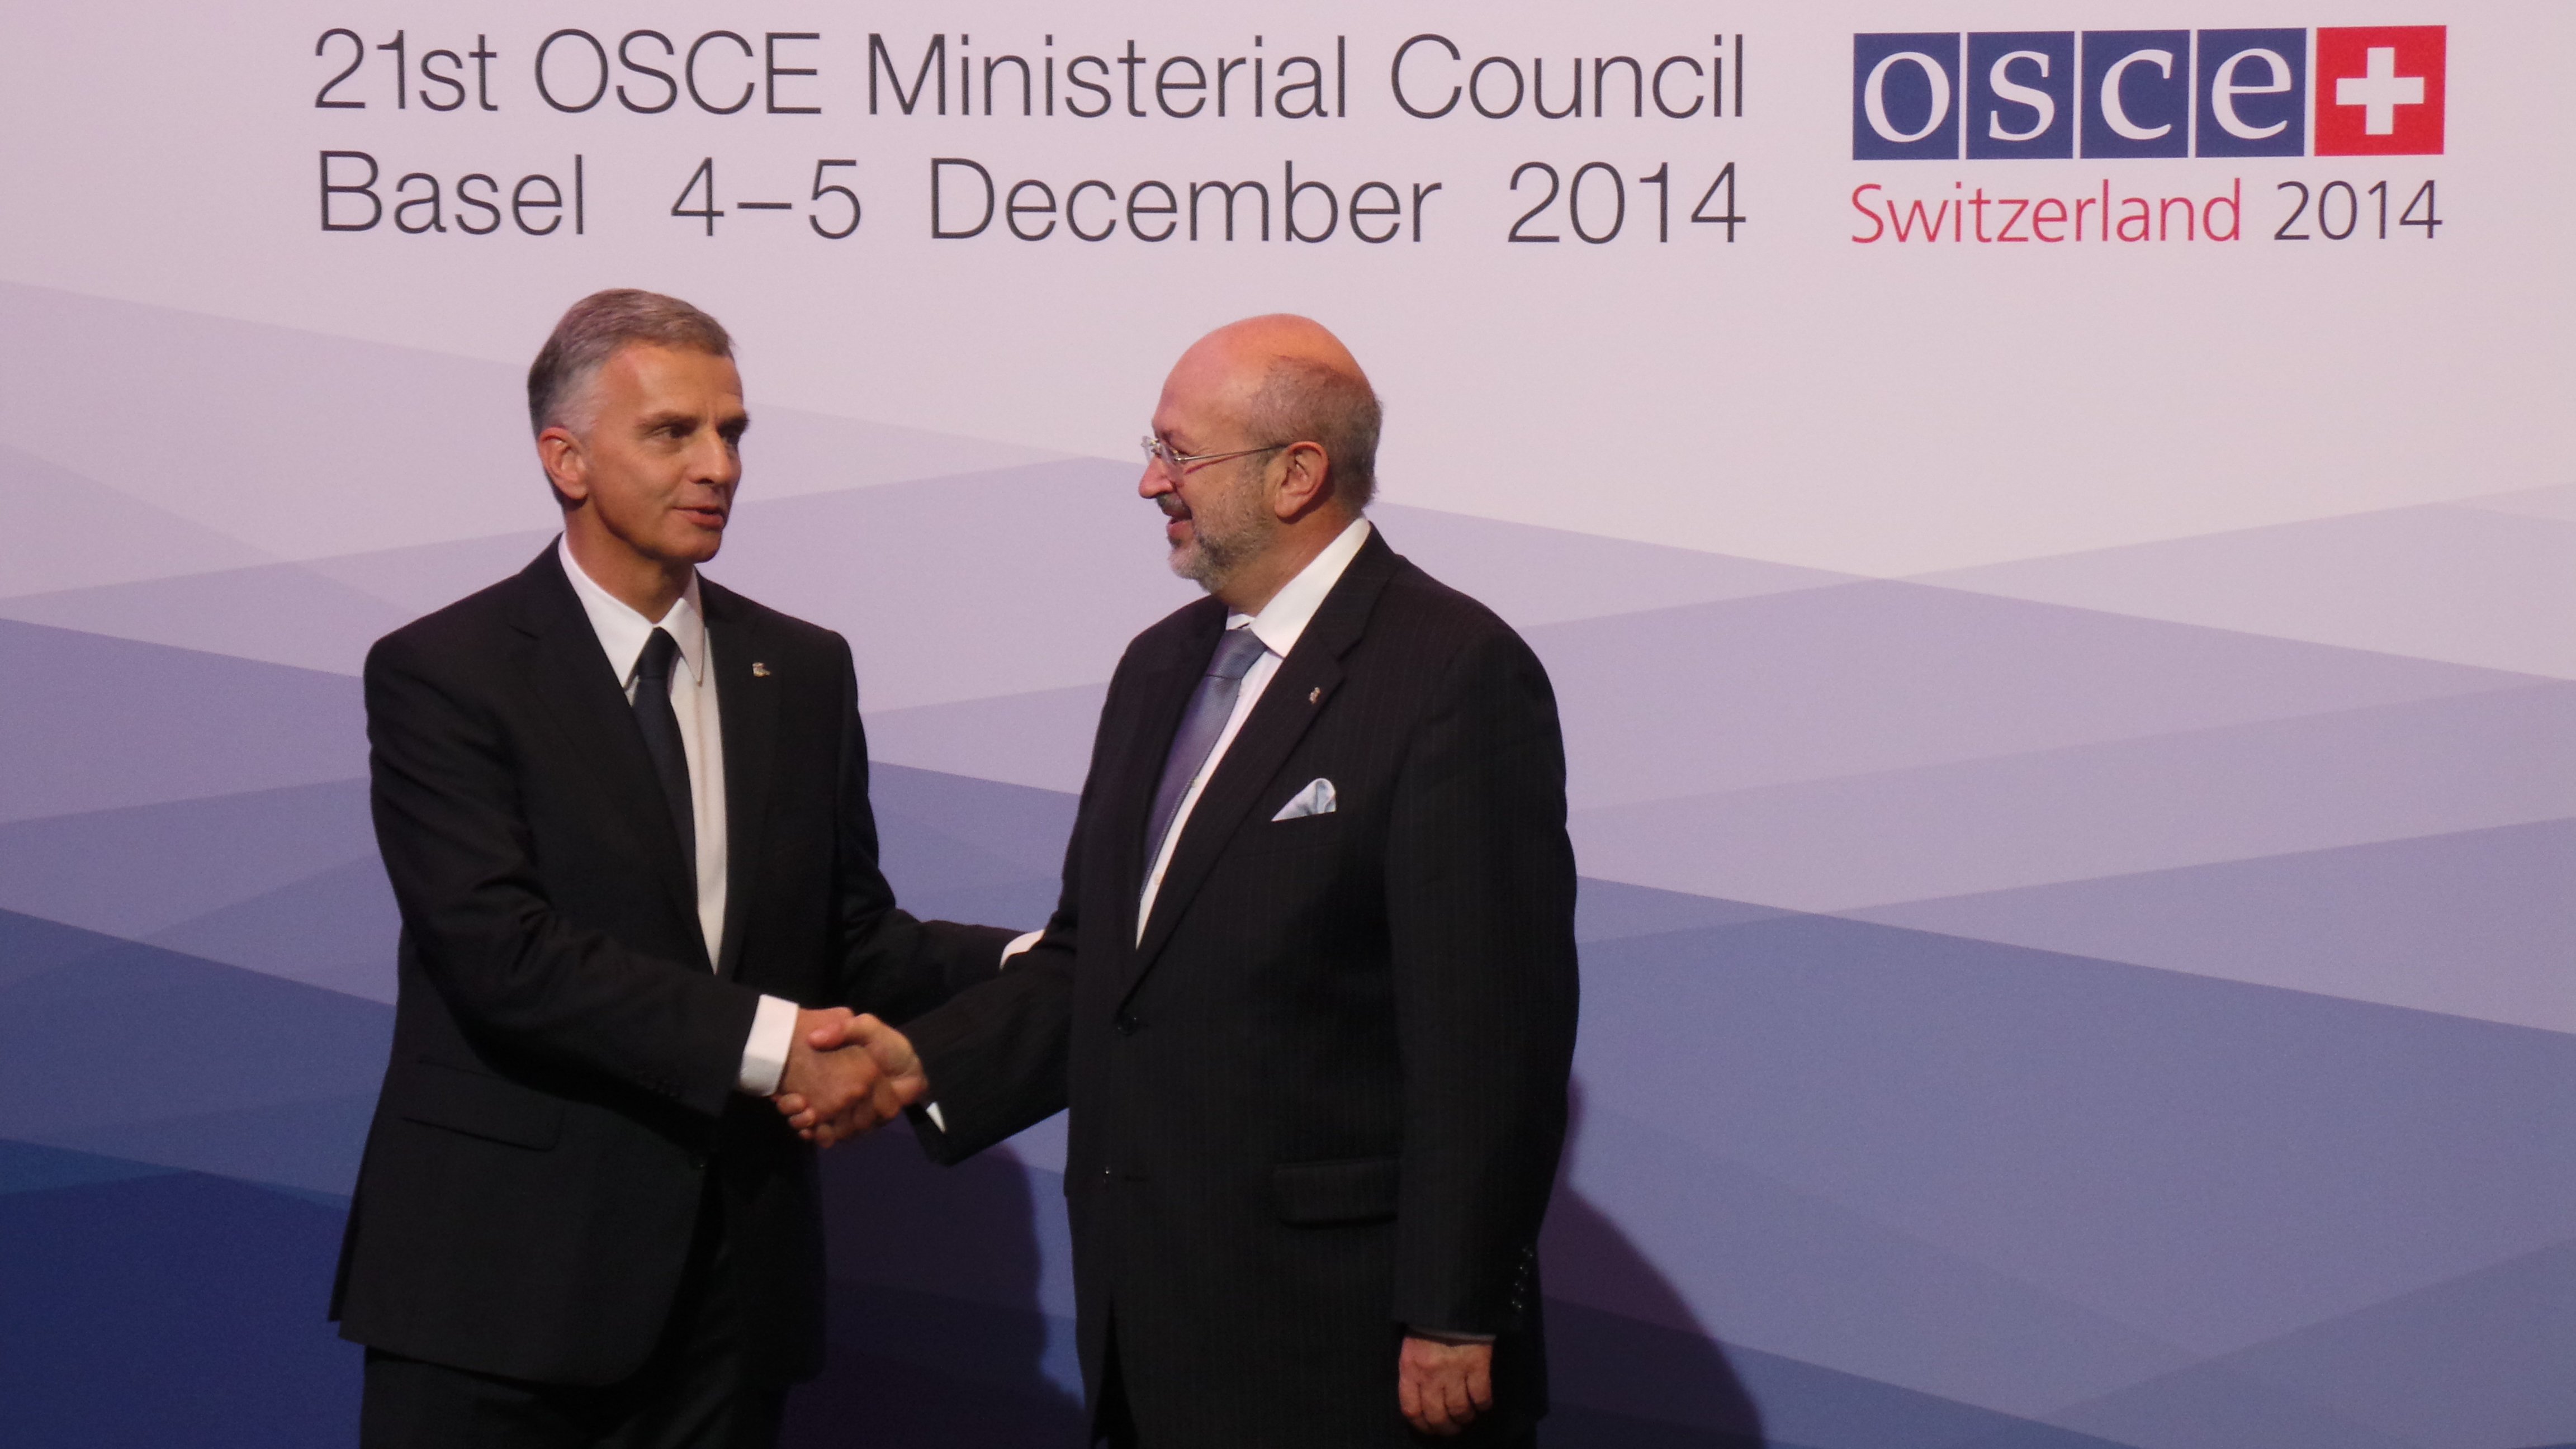 The President of the Swiss Confederation, Didier Burkhalter, greets Lamberto Zannier, Secretary General at the OSCE Ministerial Council 2014 in Basel